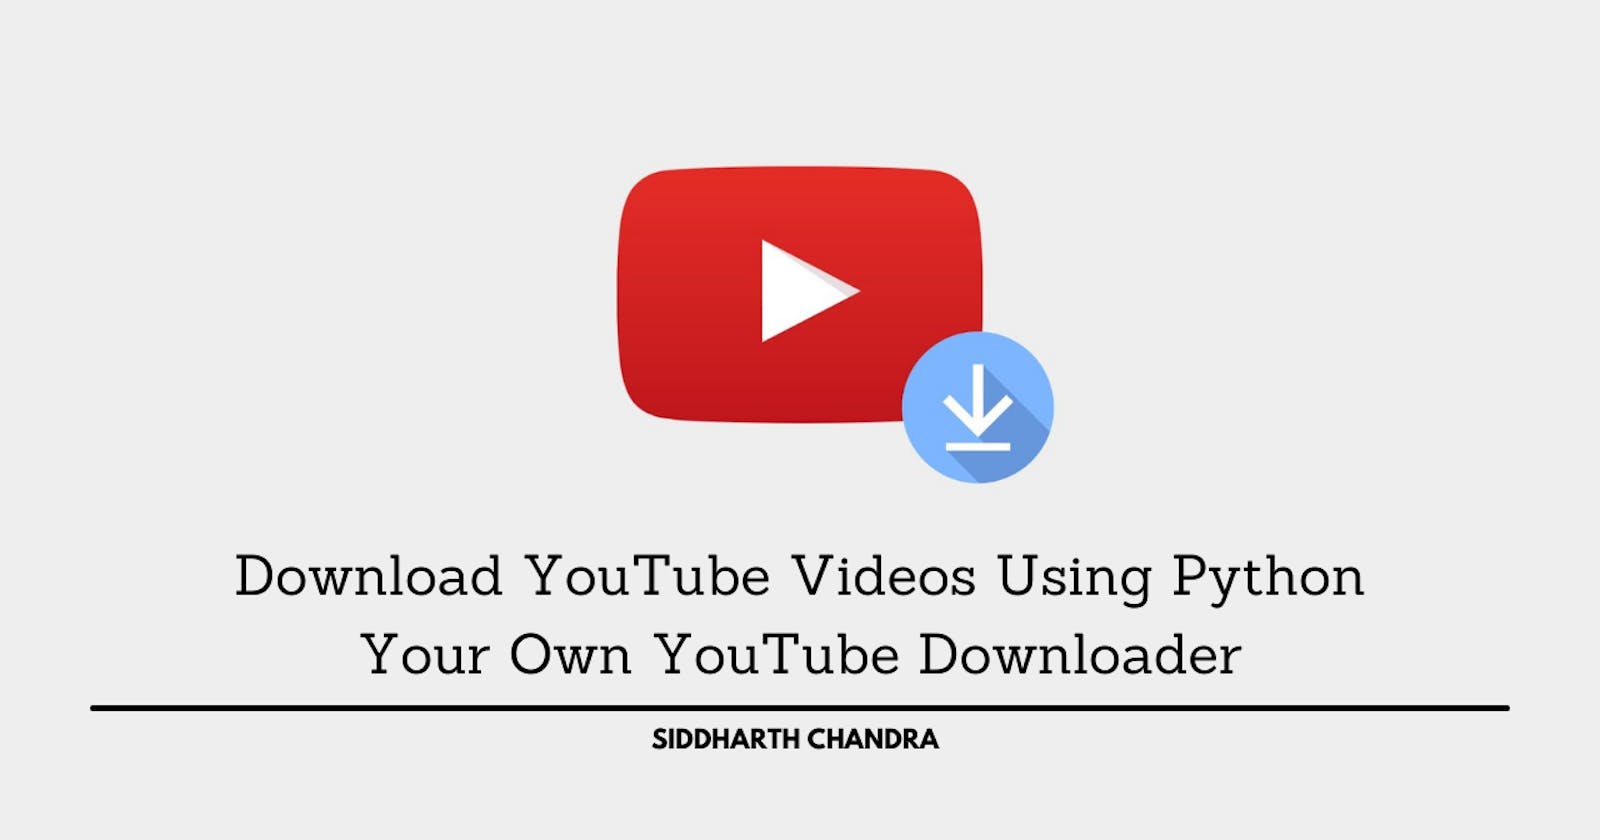 Download YouTube Videos Using Python - Your Own YouTube Downloader